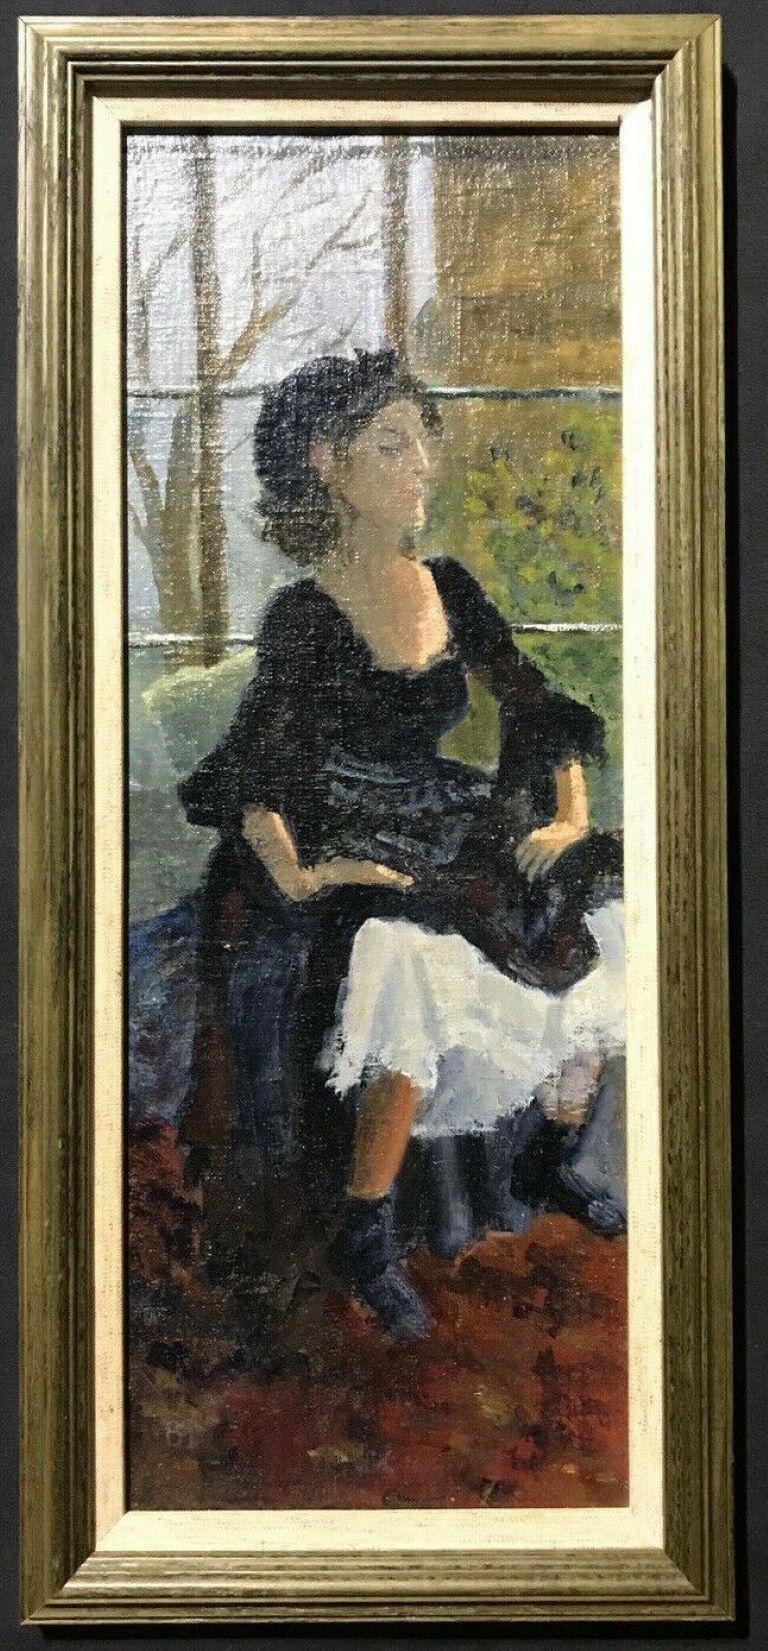 Unknown Figurative Painting - ENGLISH IMPRESSIONIST OIL - LADY IN OLD FASHIONED DRESS SEATED IN WINDOW SILL